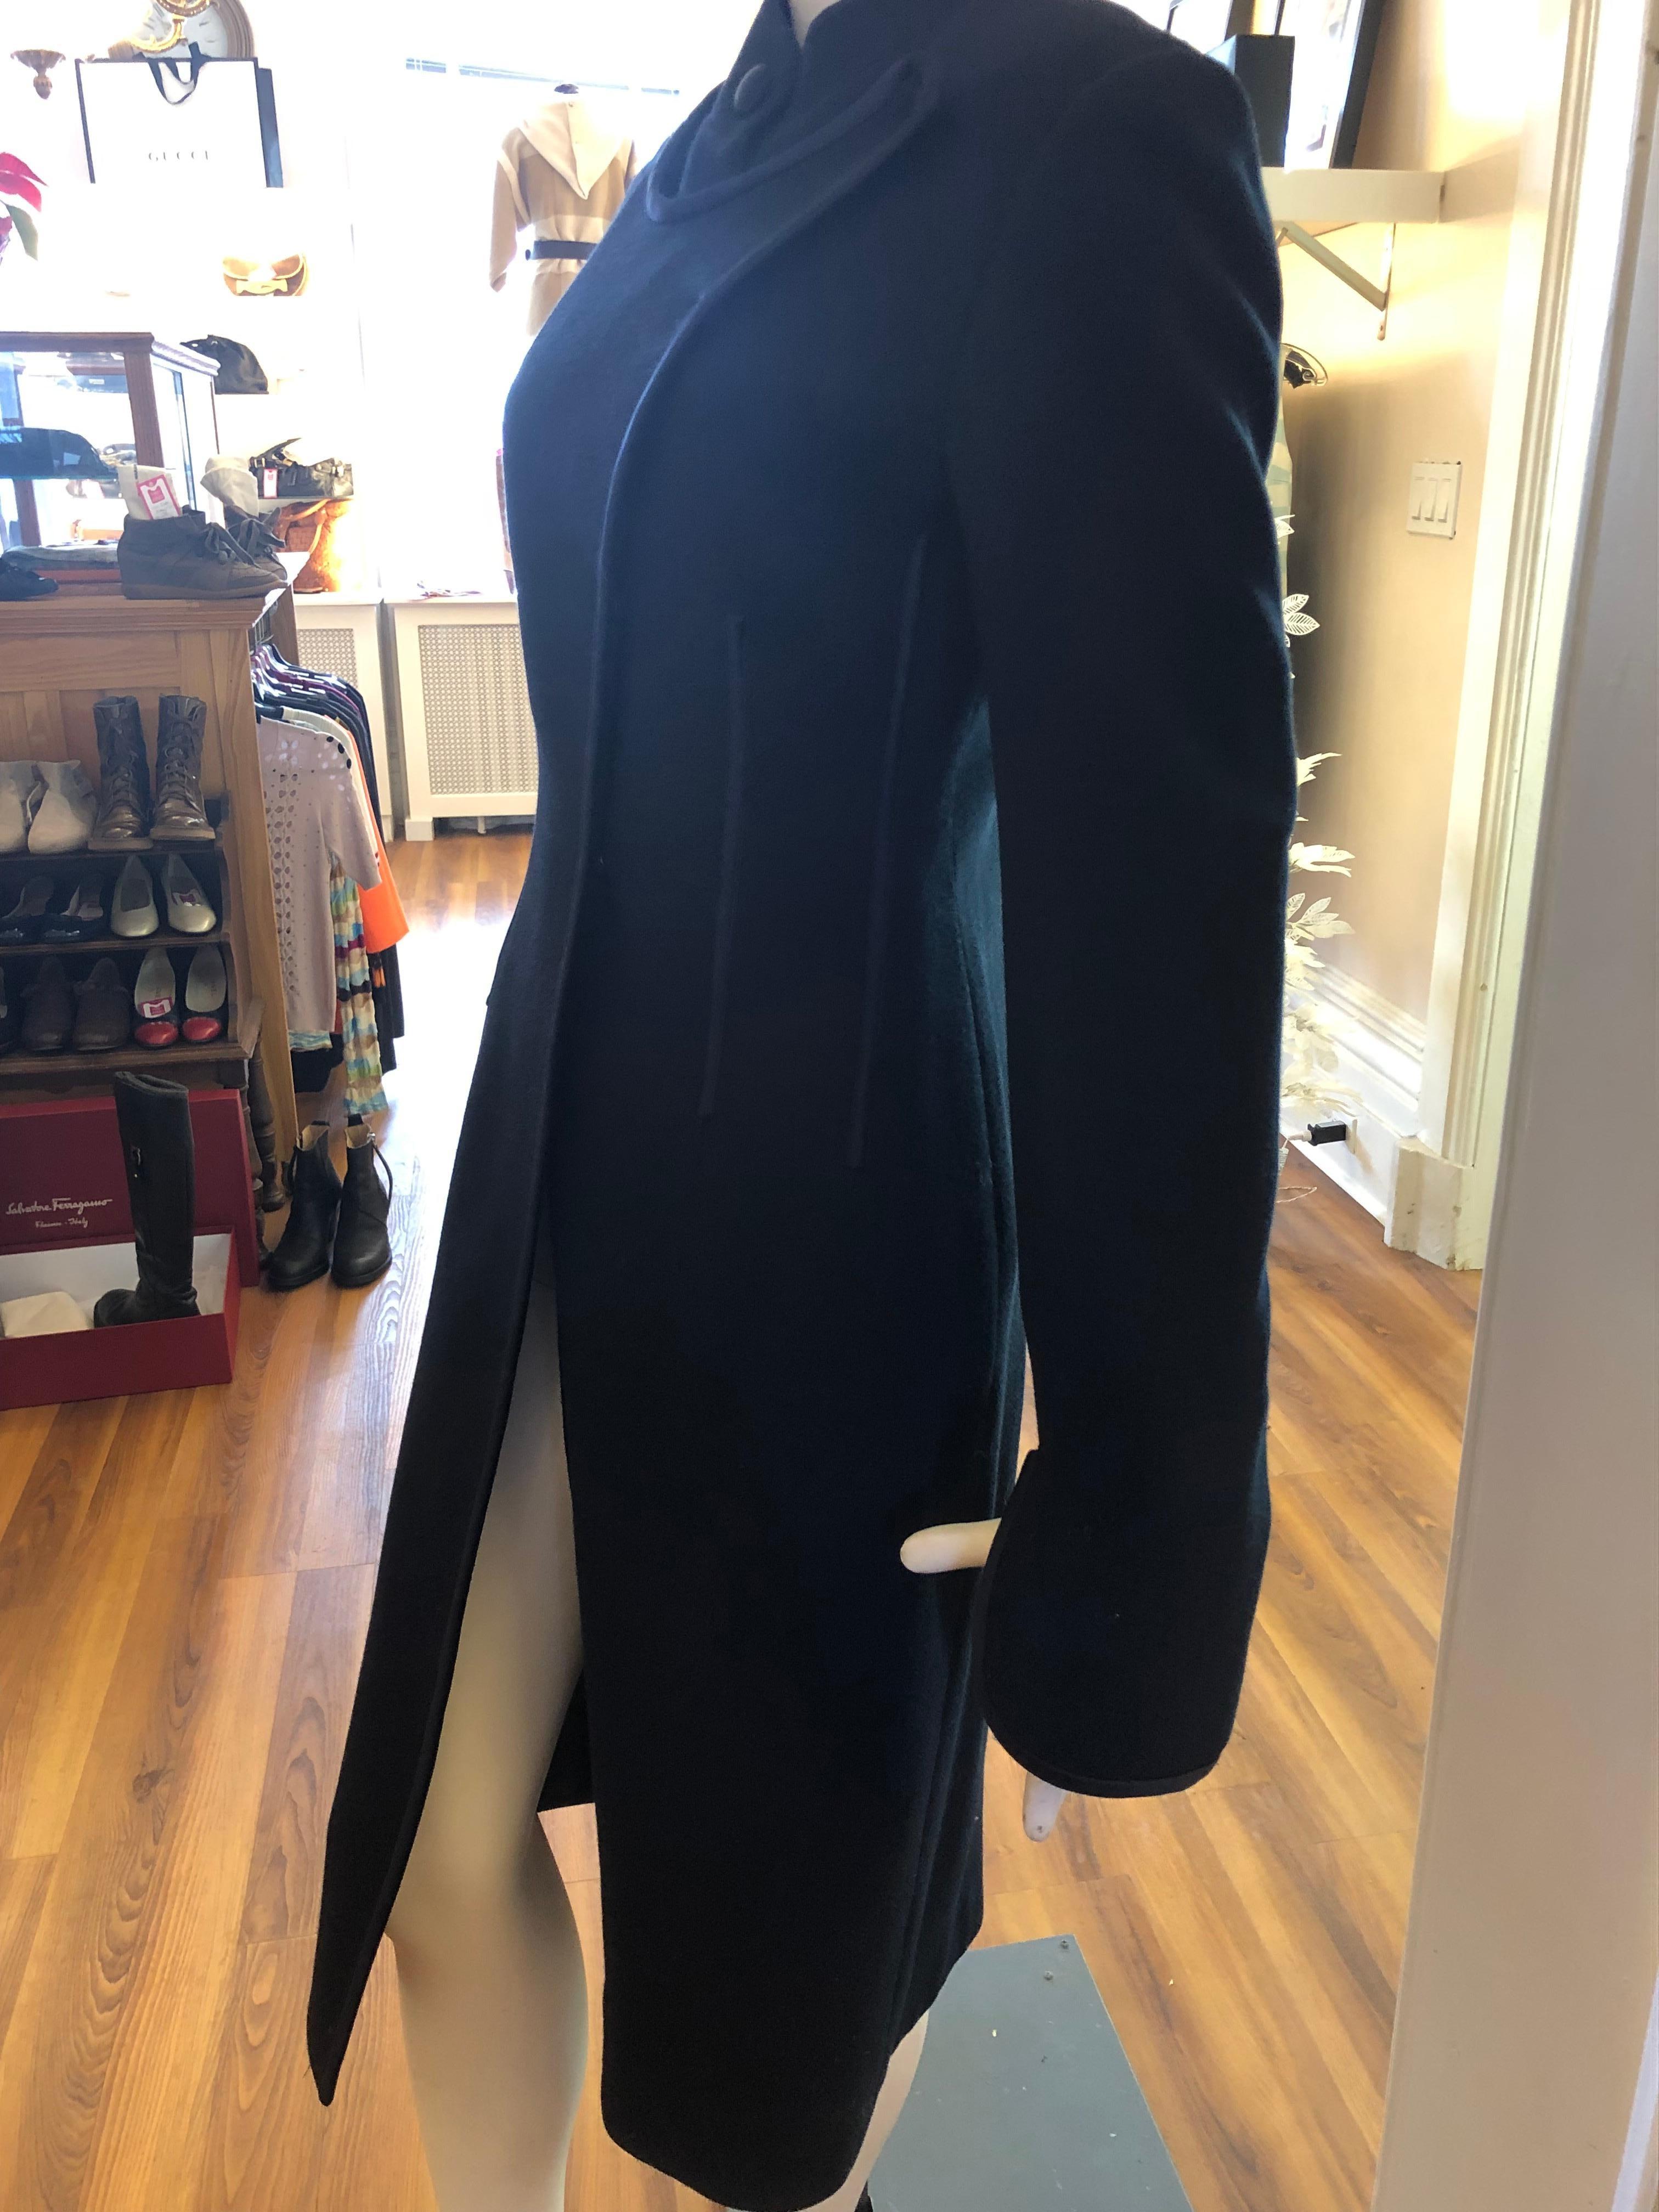 This gorgeous Celine coat is in fantastic condition, made of wool with navy blue satin piping. A distinguishing feature of this coat is the bib insert which is shown in the photographs, as well as the unusual sleeves.